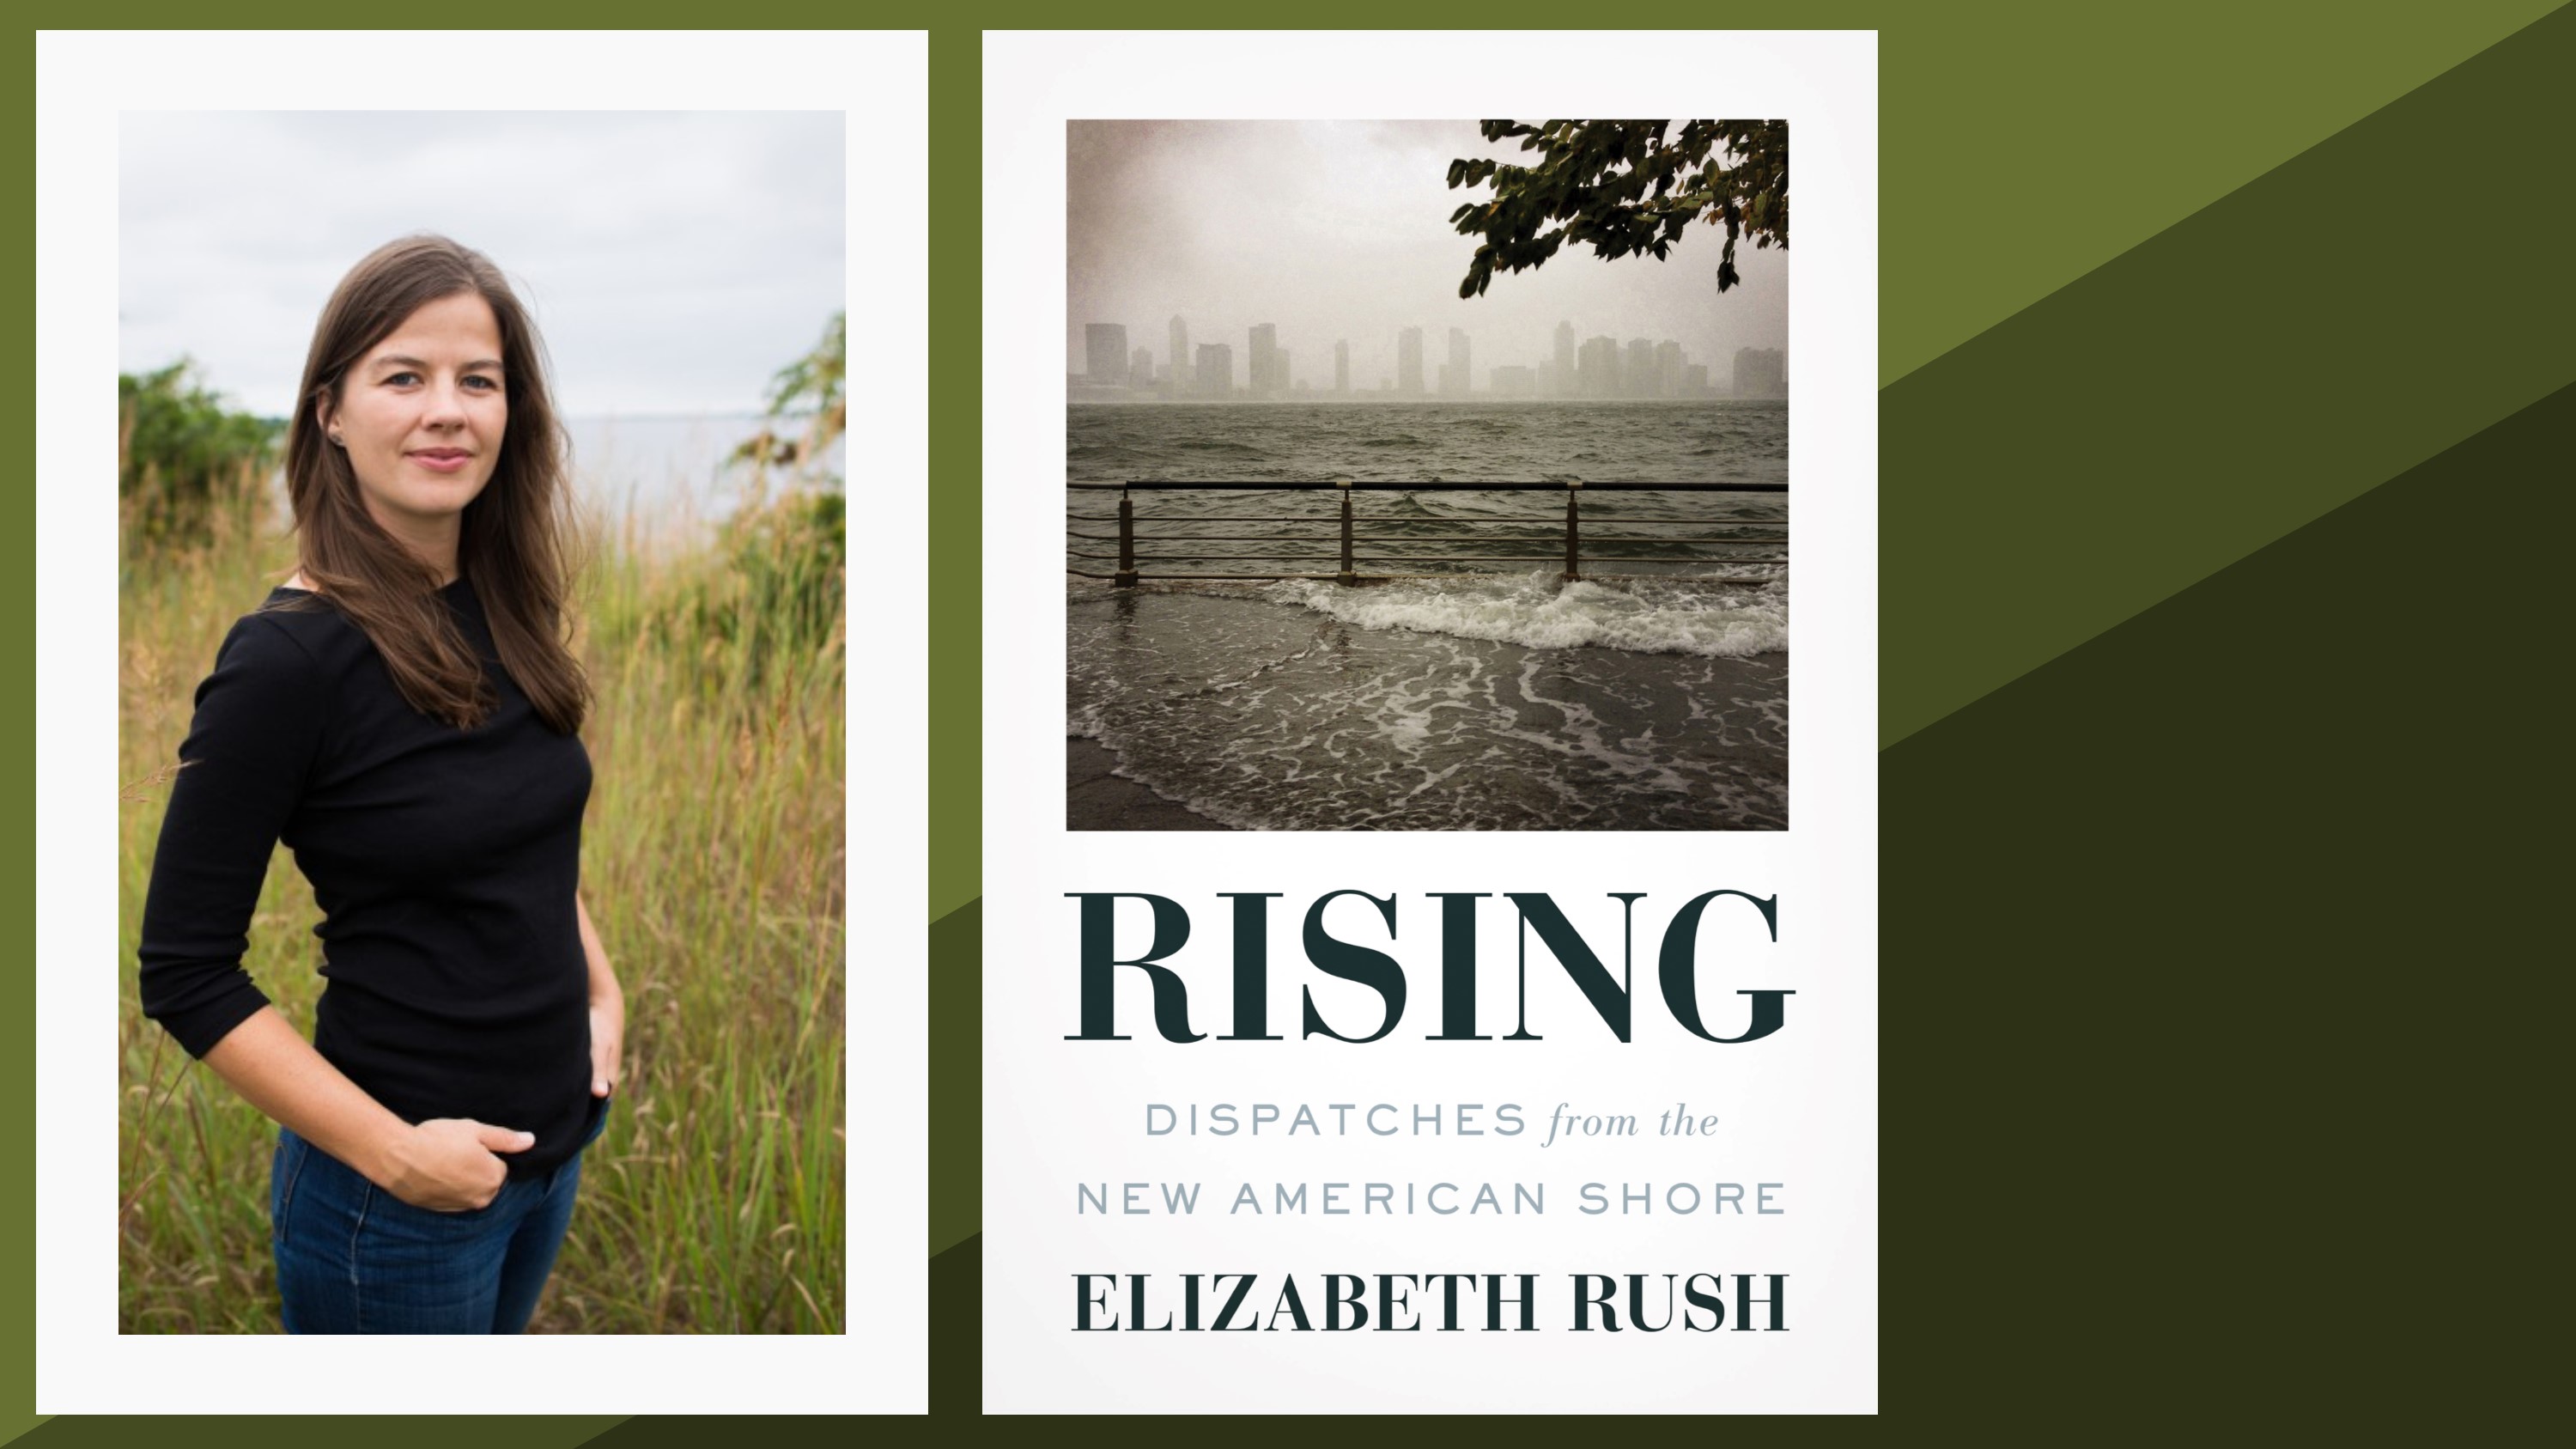 Photo of author Elizabeth Rush and the cover of her book, Rising: Dispatches from the New American Shore